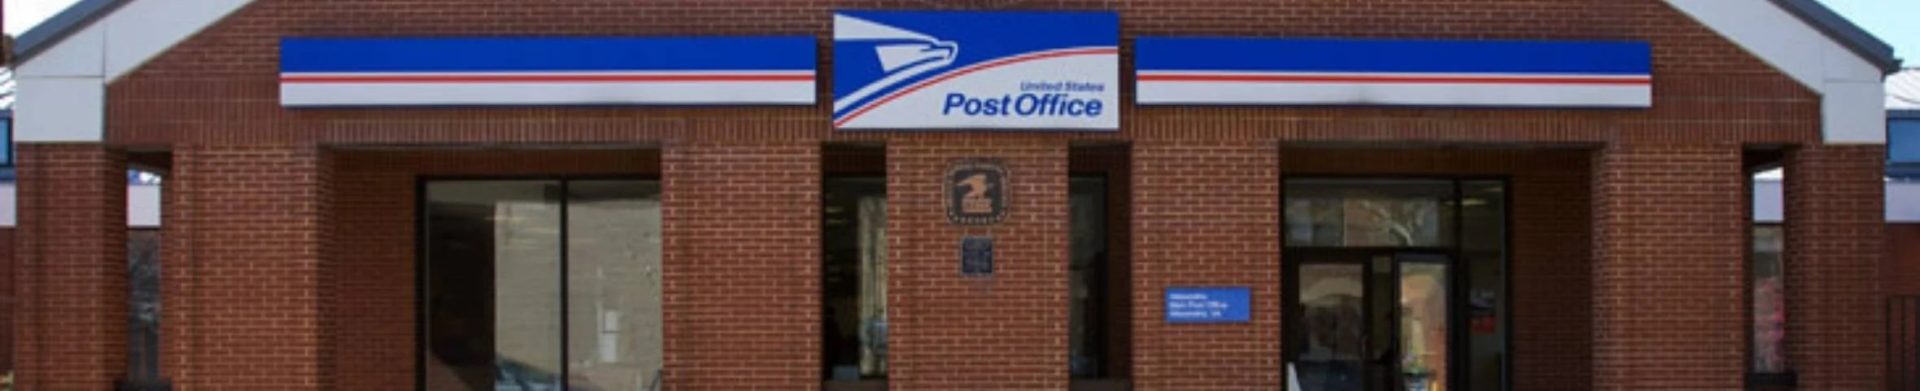 USPS branch in the daytime